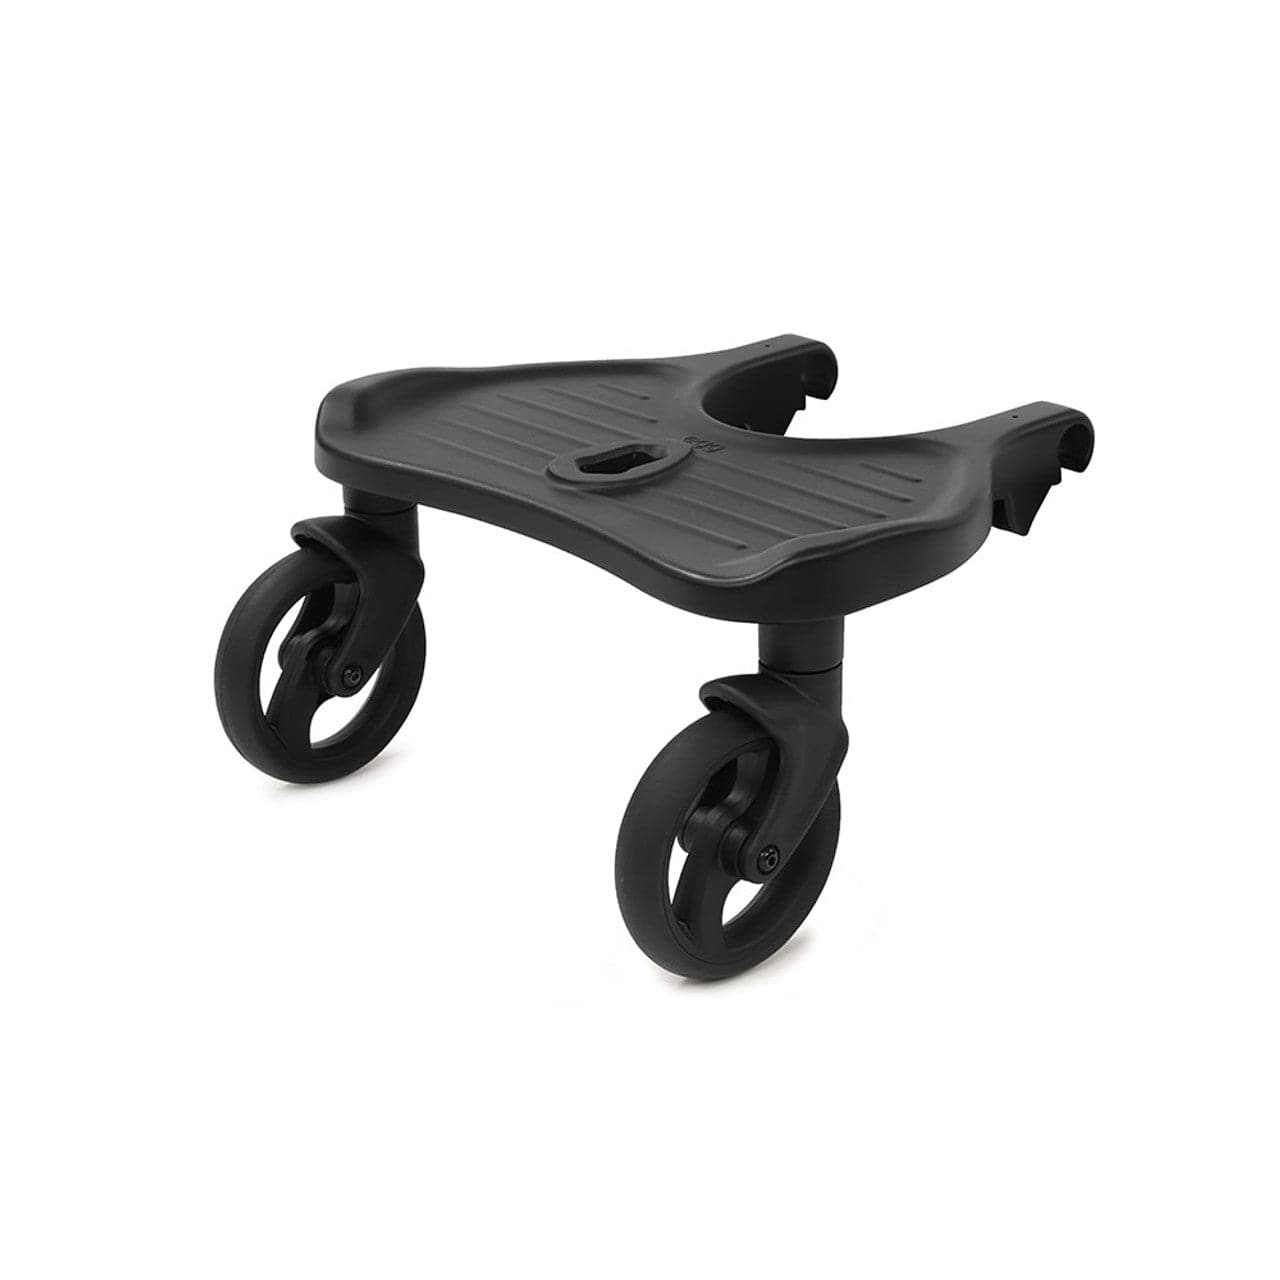 Egg® Ride-on Board with Seat Post Hole - Black - For Your Little One